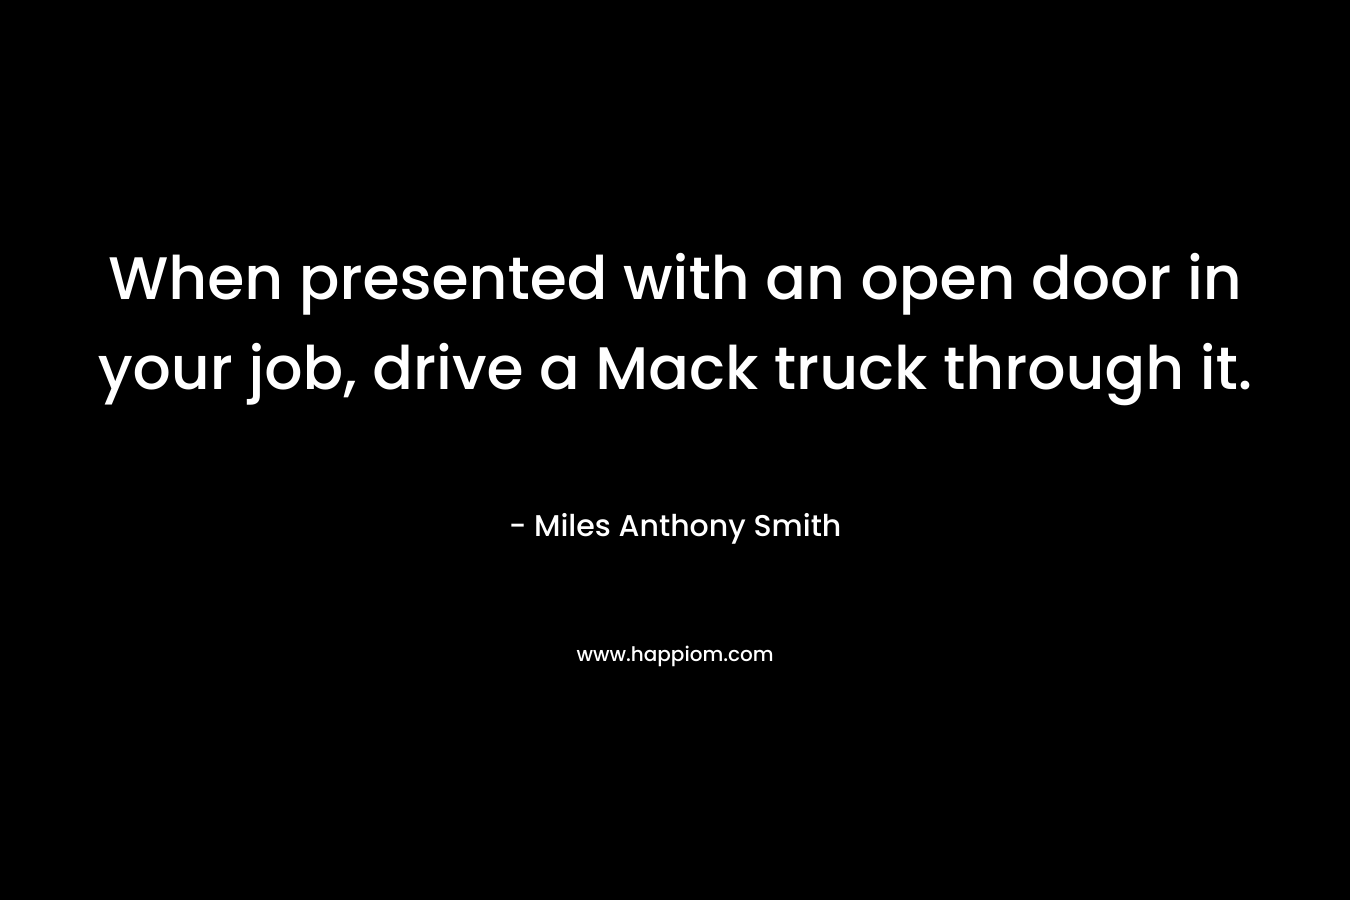 When presented with an open door in your job, drive a Mack truck through it. – Miles Anthony Smith